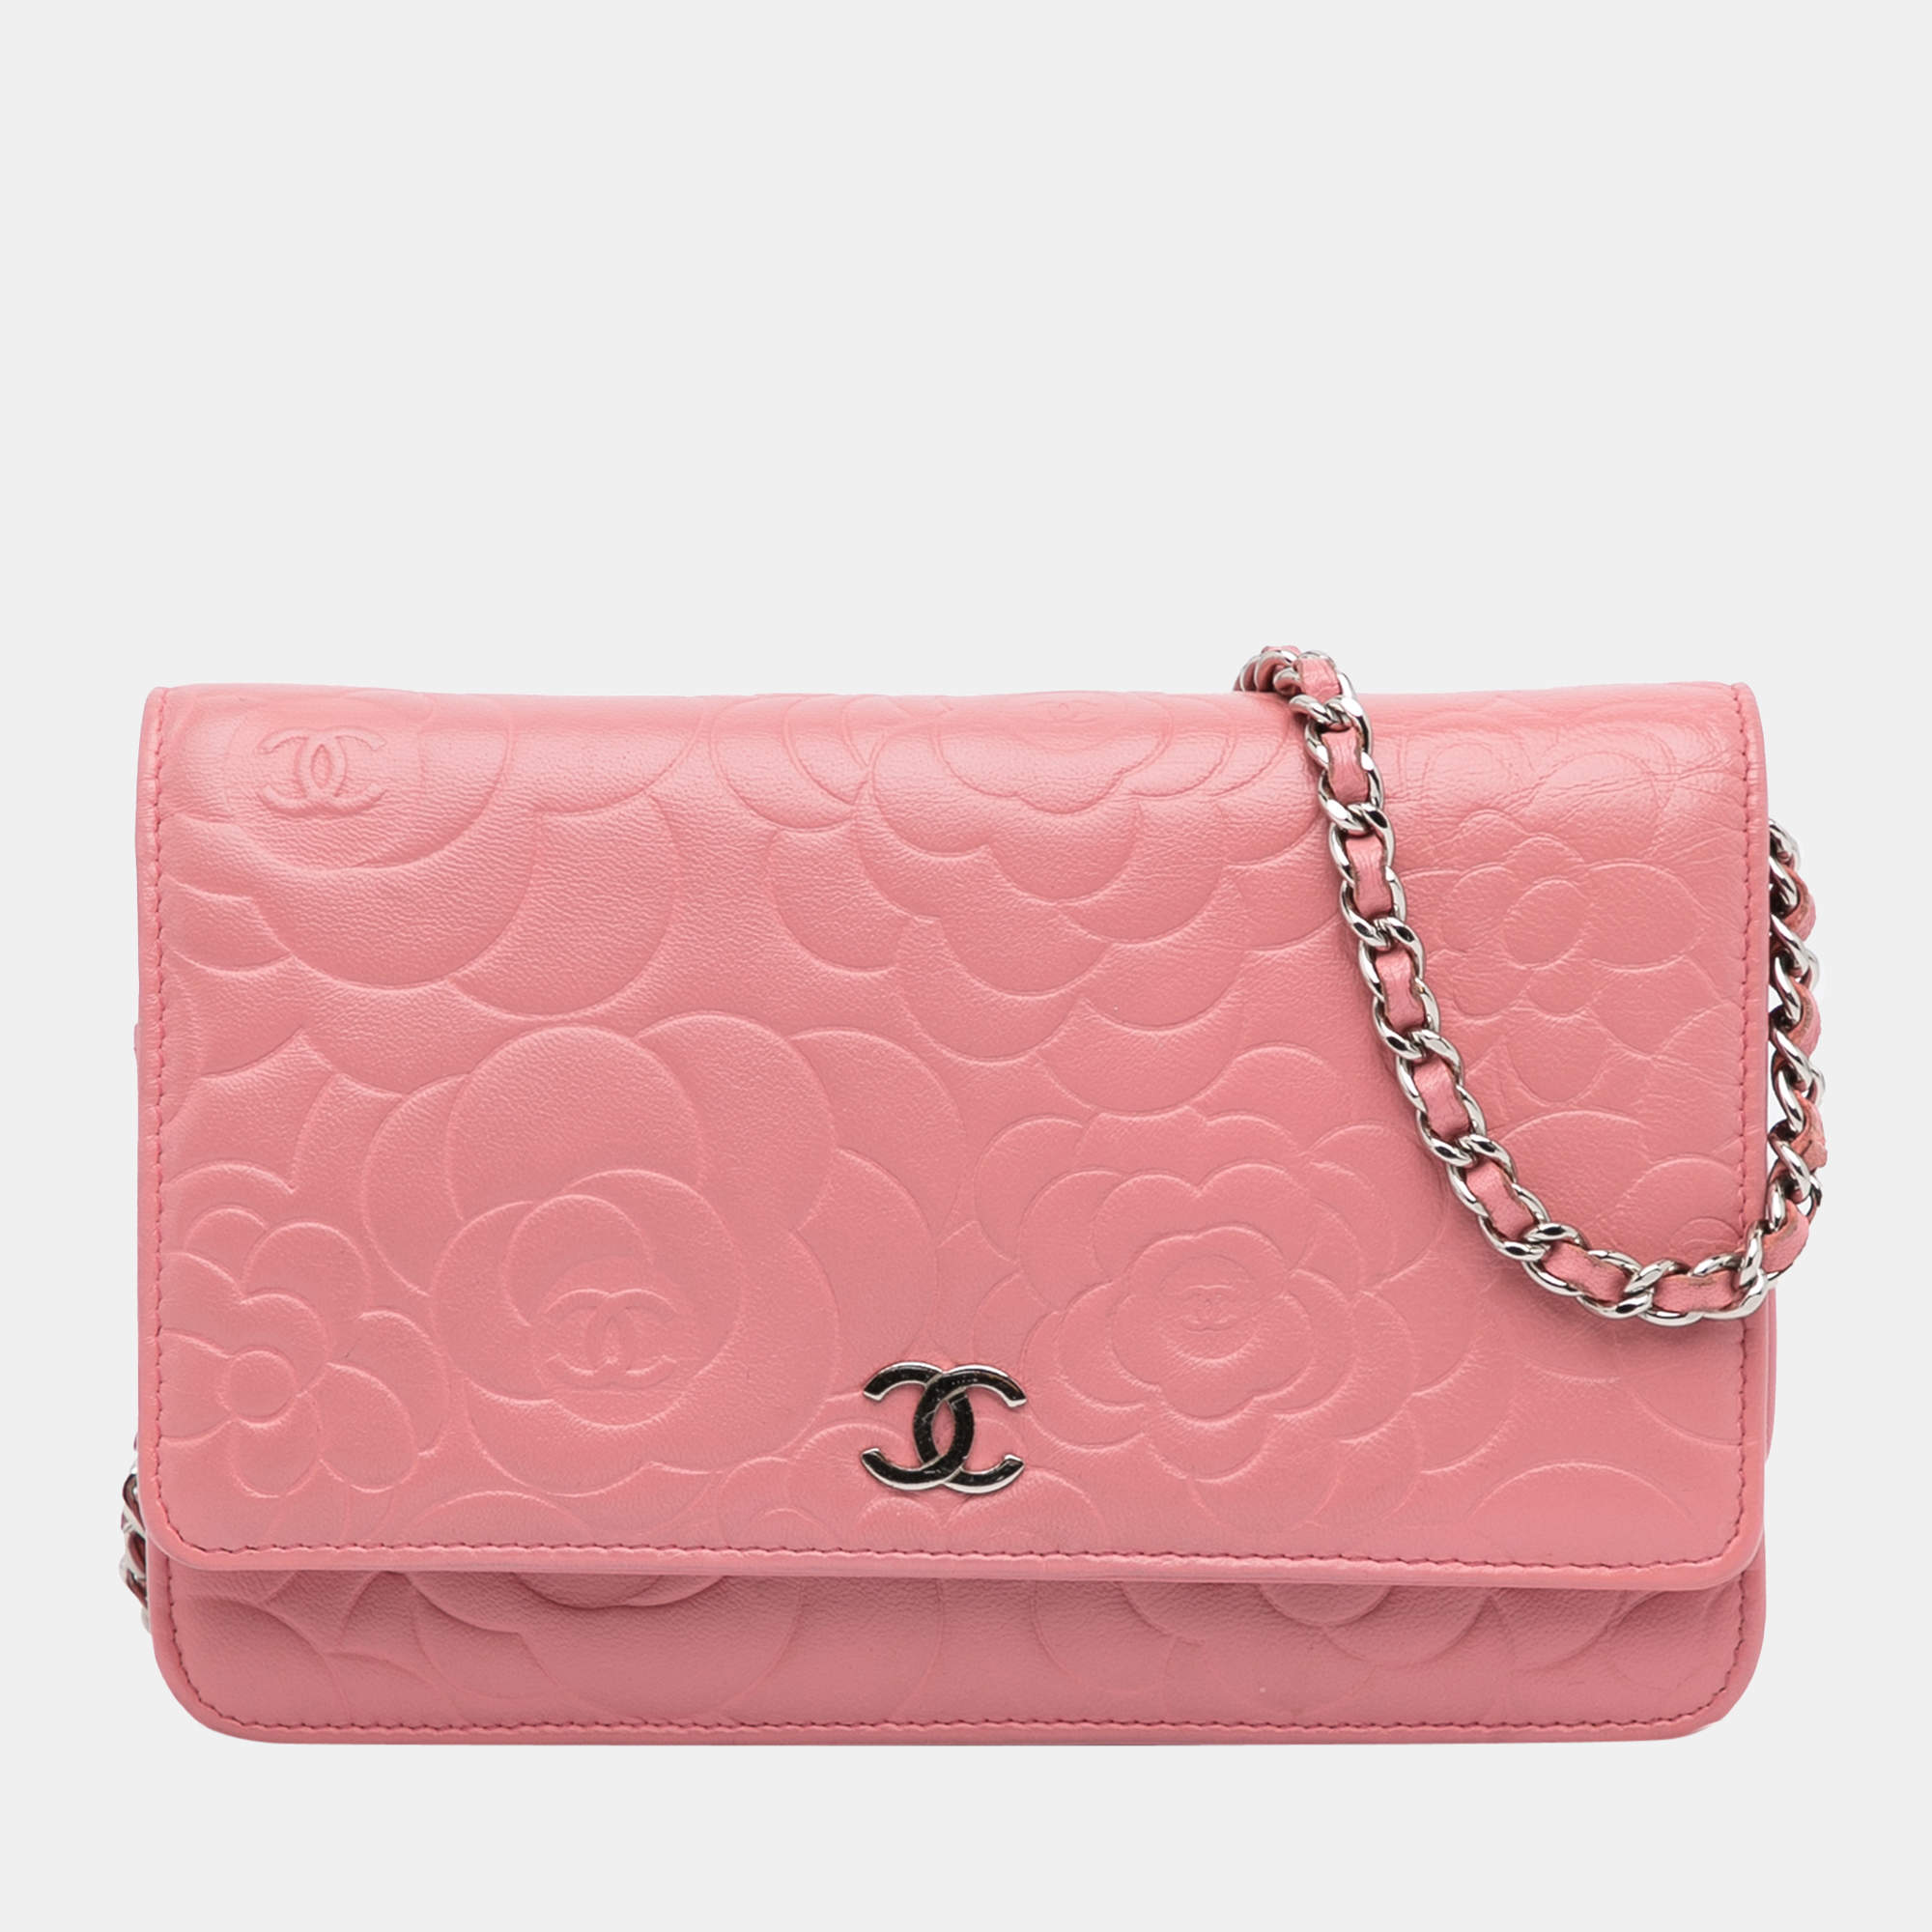 Chanel Pink Camellia Wallet On Chain Chanel